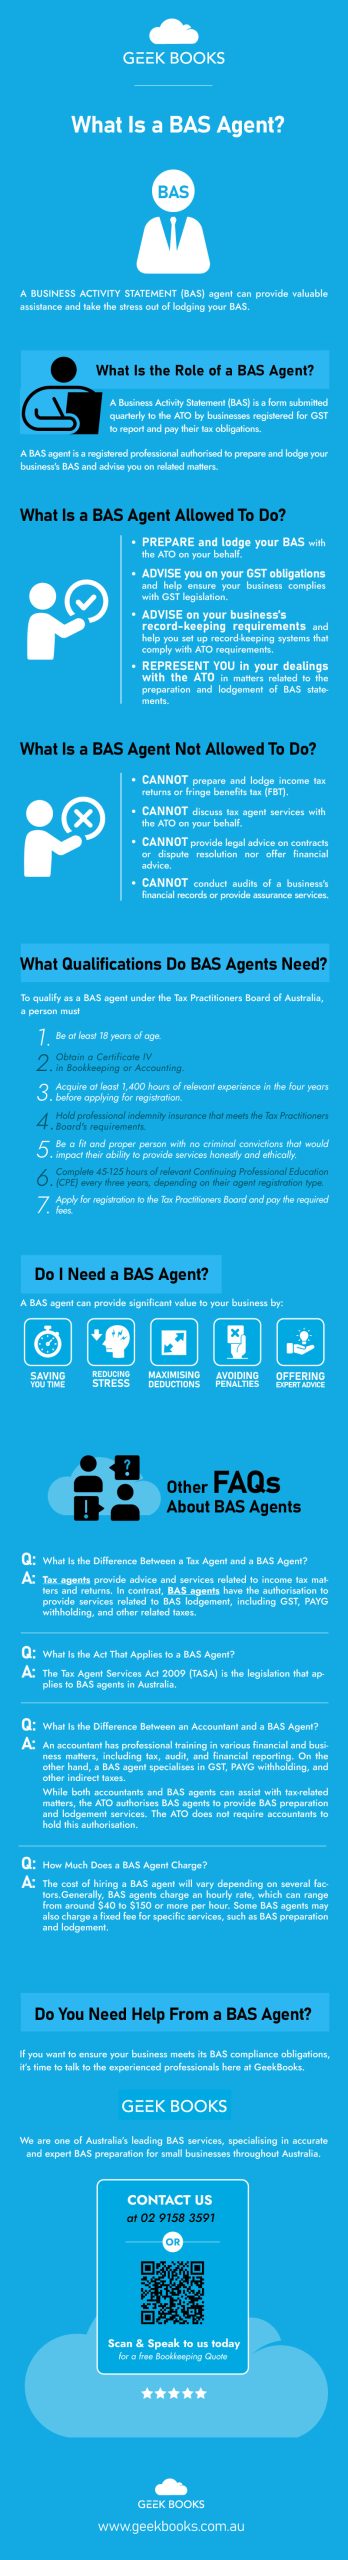 What Is a BAS Agent - A Quick Guide for Business Owners Infographic